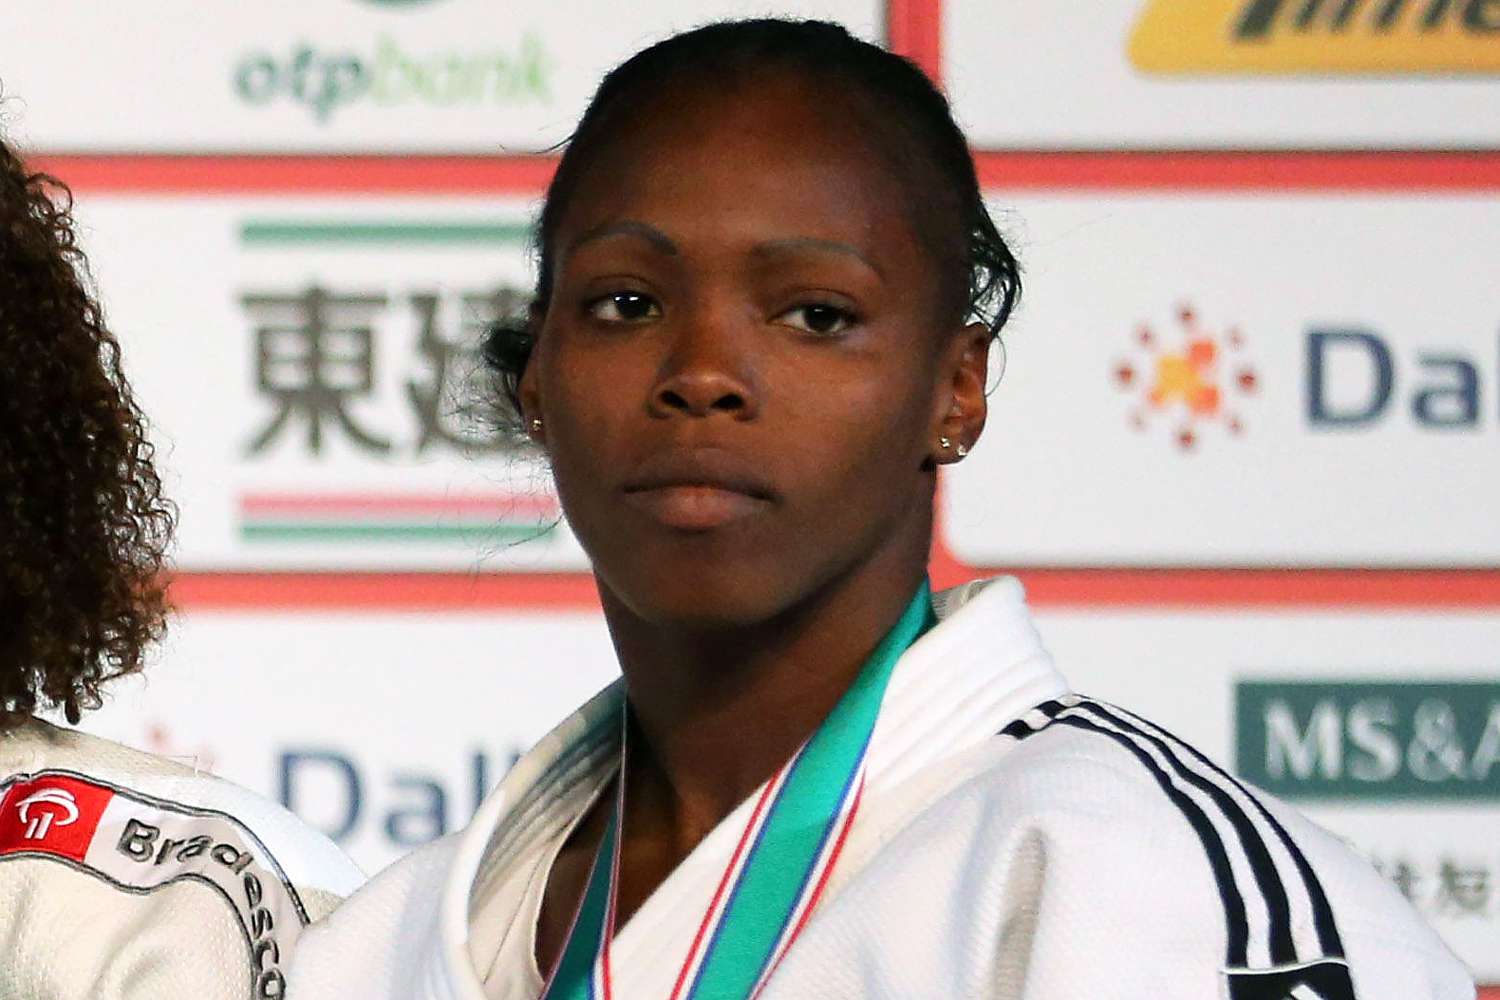 olympic judo wrestler maricet espinosa gonzález dead at 34 after heart attack